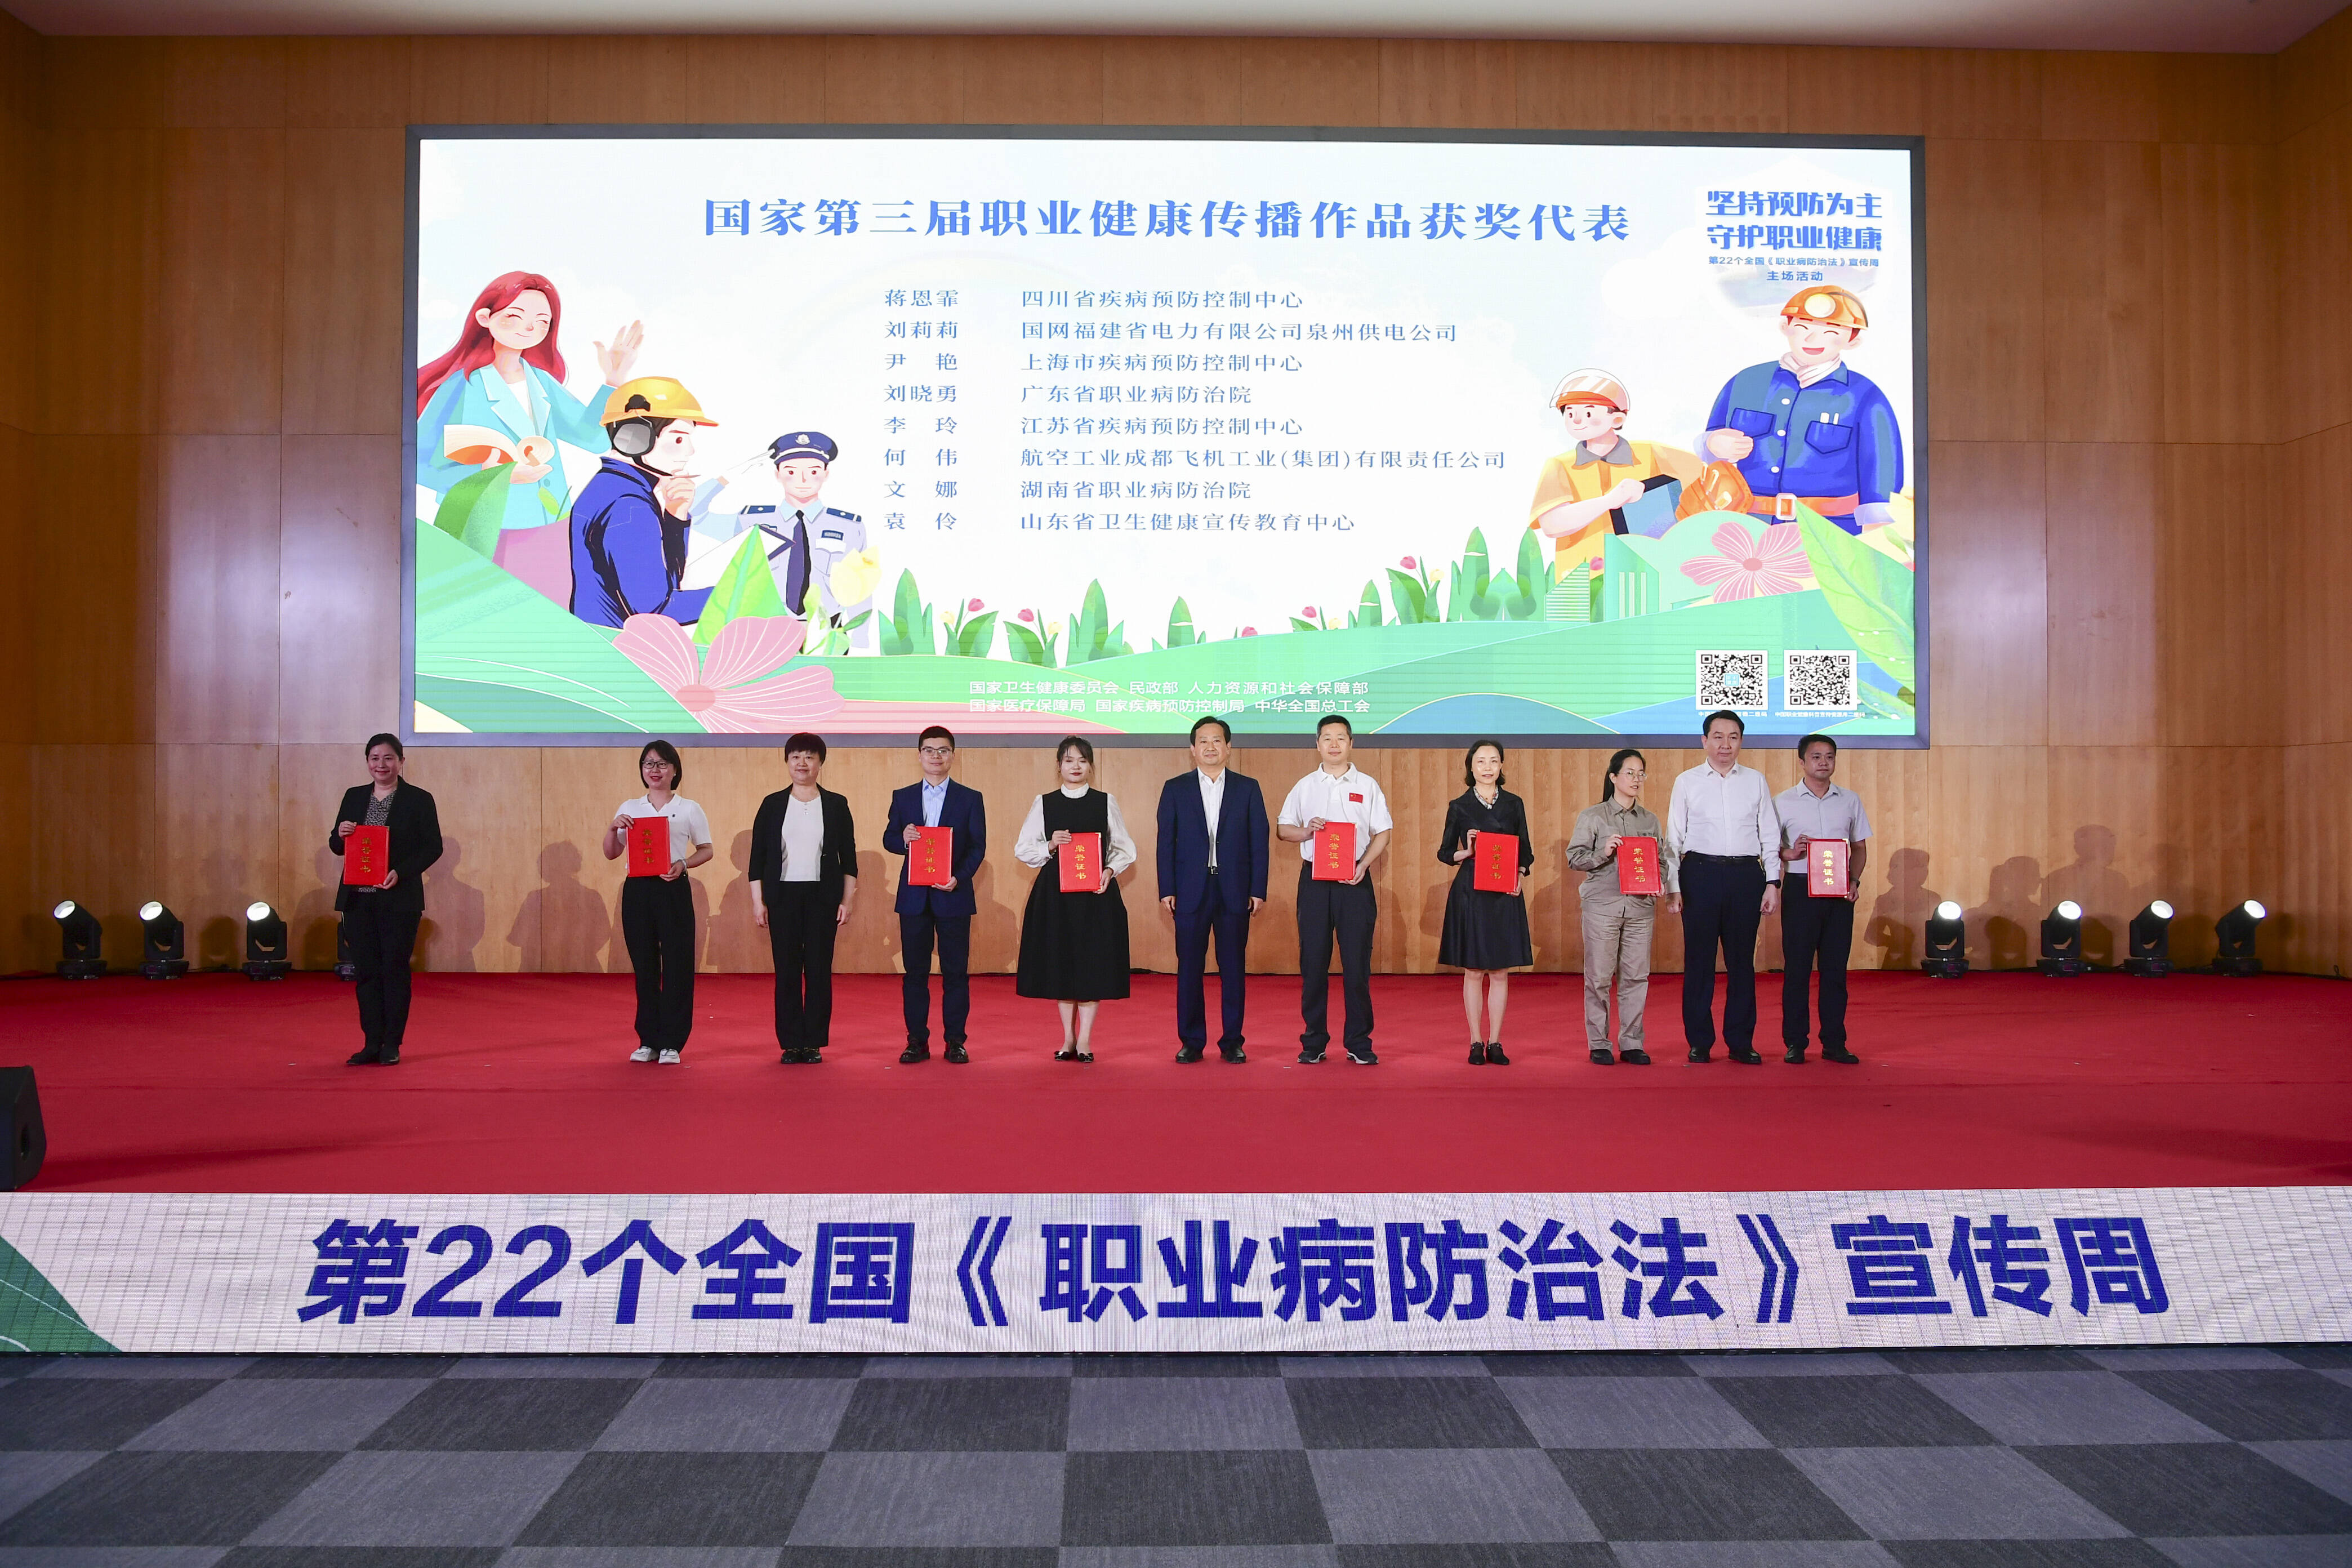  This team is "eye-catching" -- Sidelights of the publicity week of the National Occupational Disease Prevention Law co organized by Shandong Health Education Center